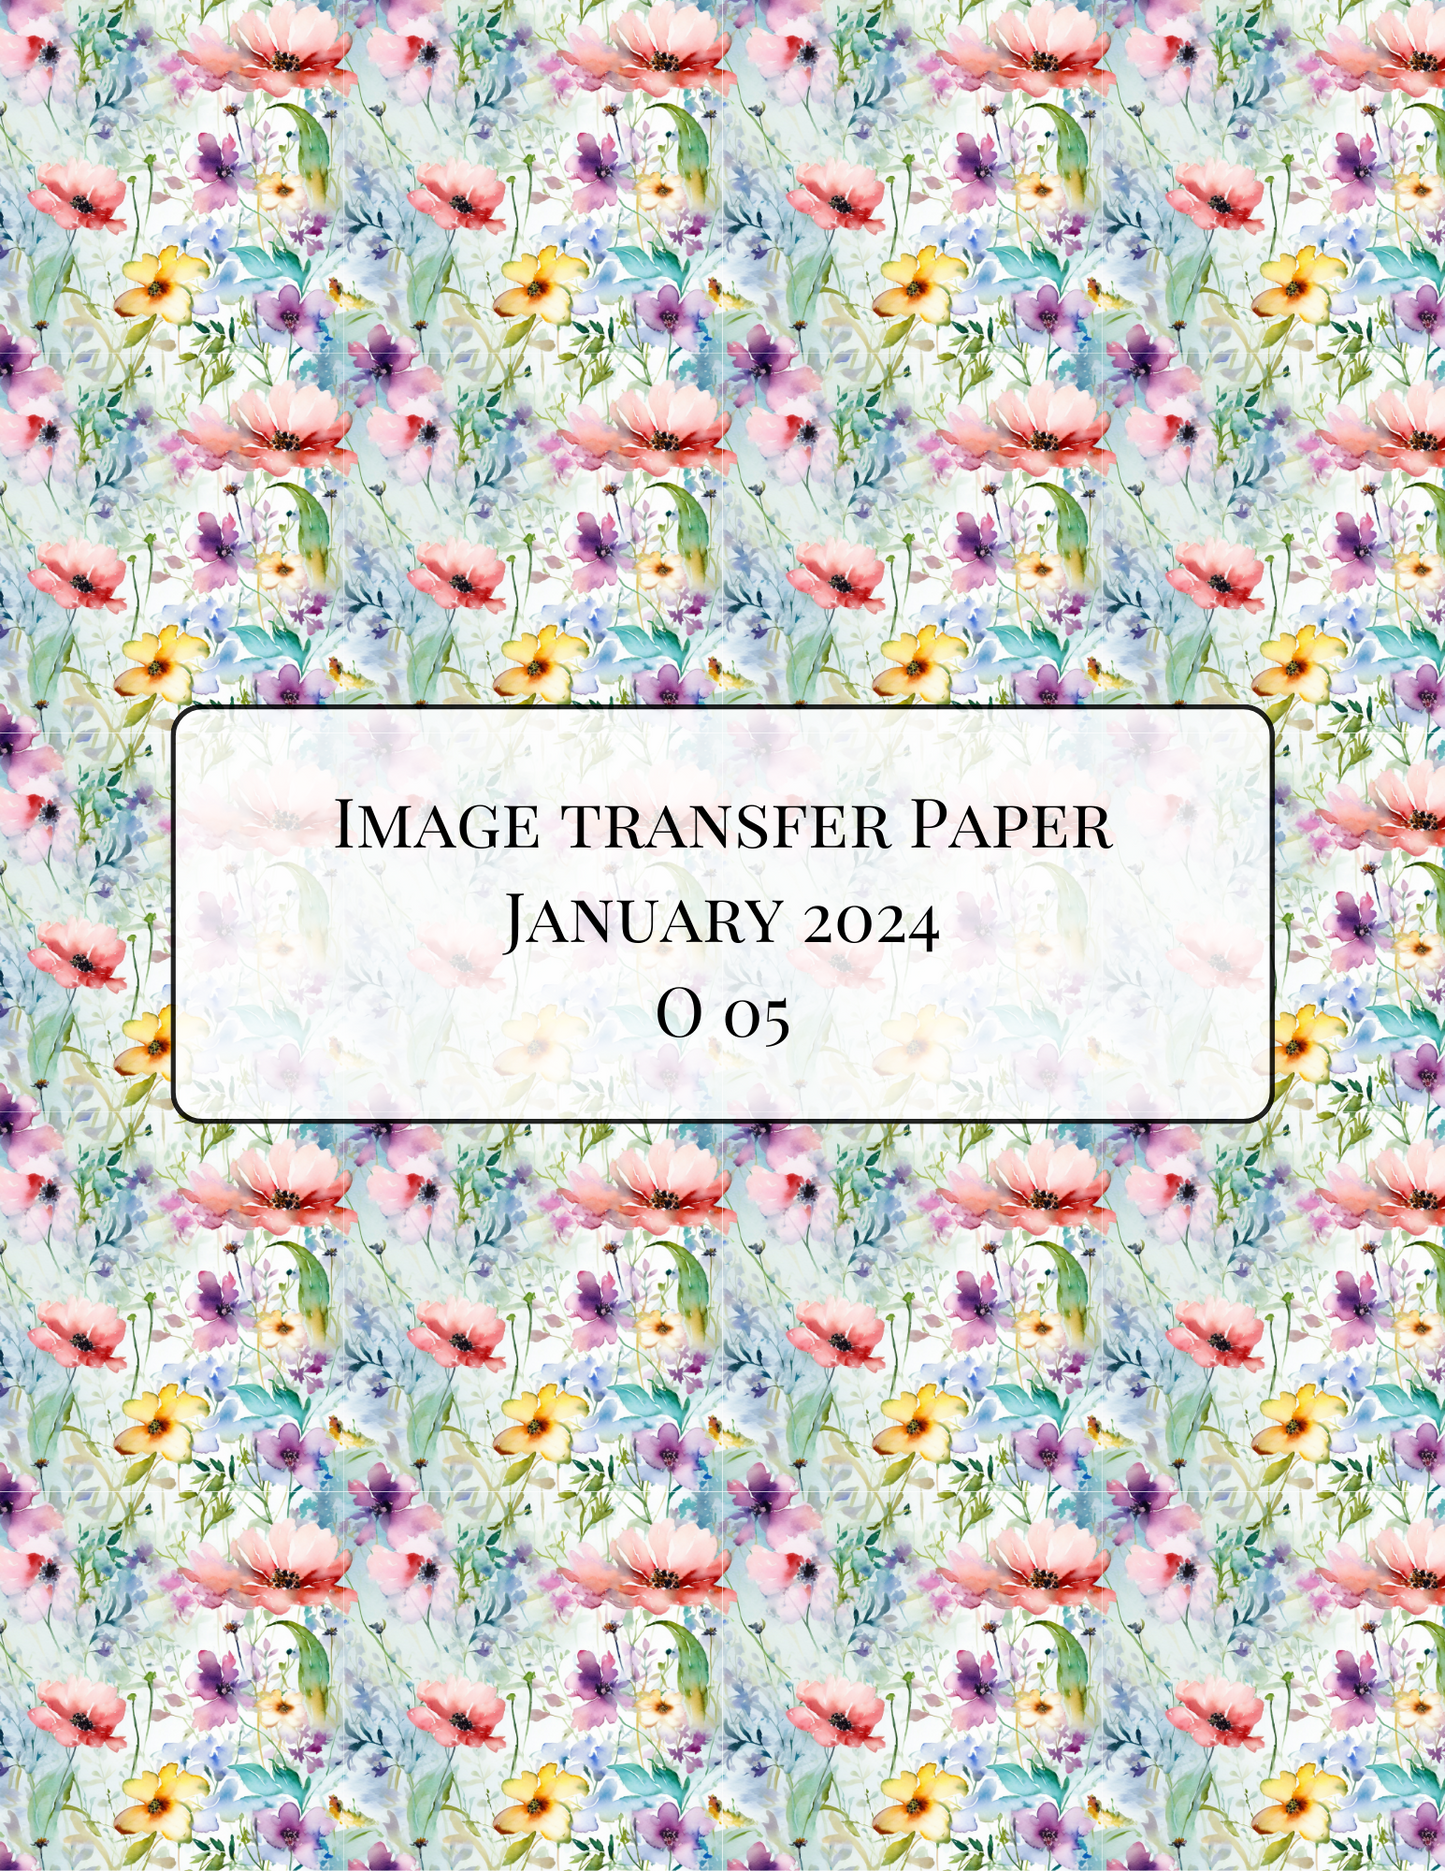 O05 Transfer Paper - January Launch